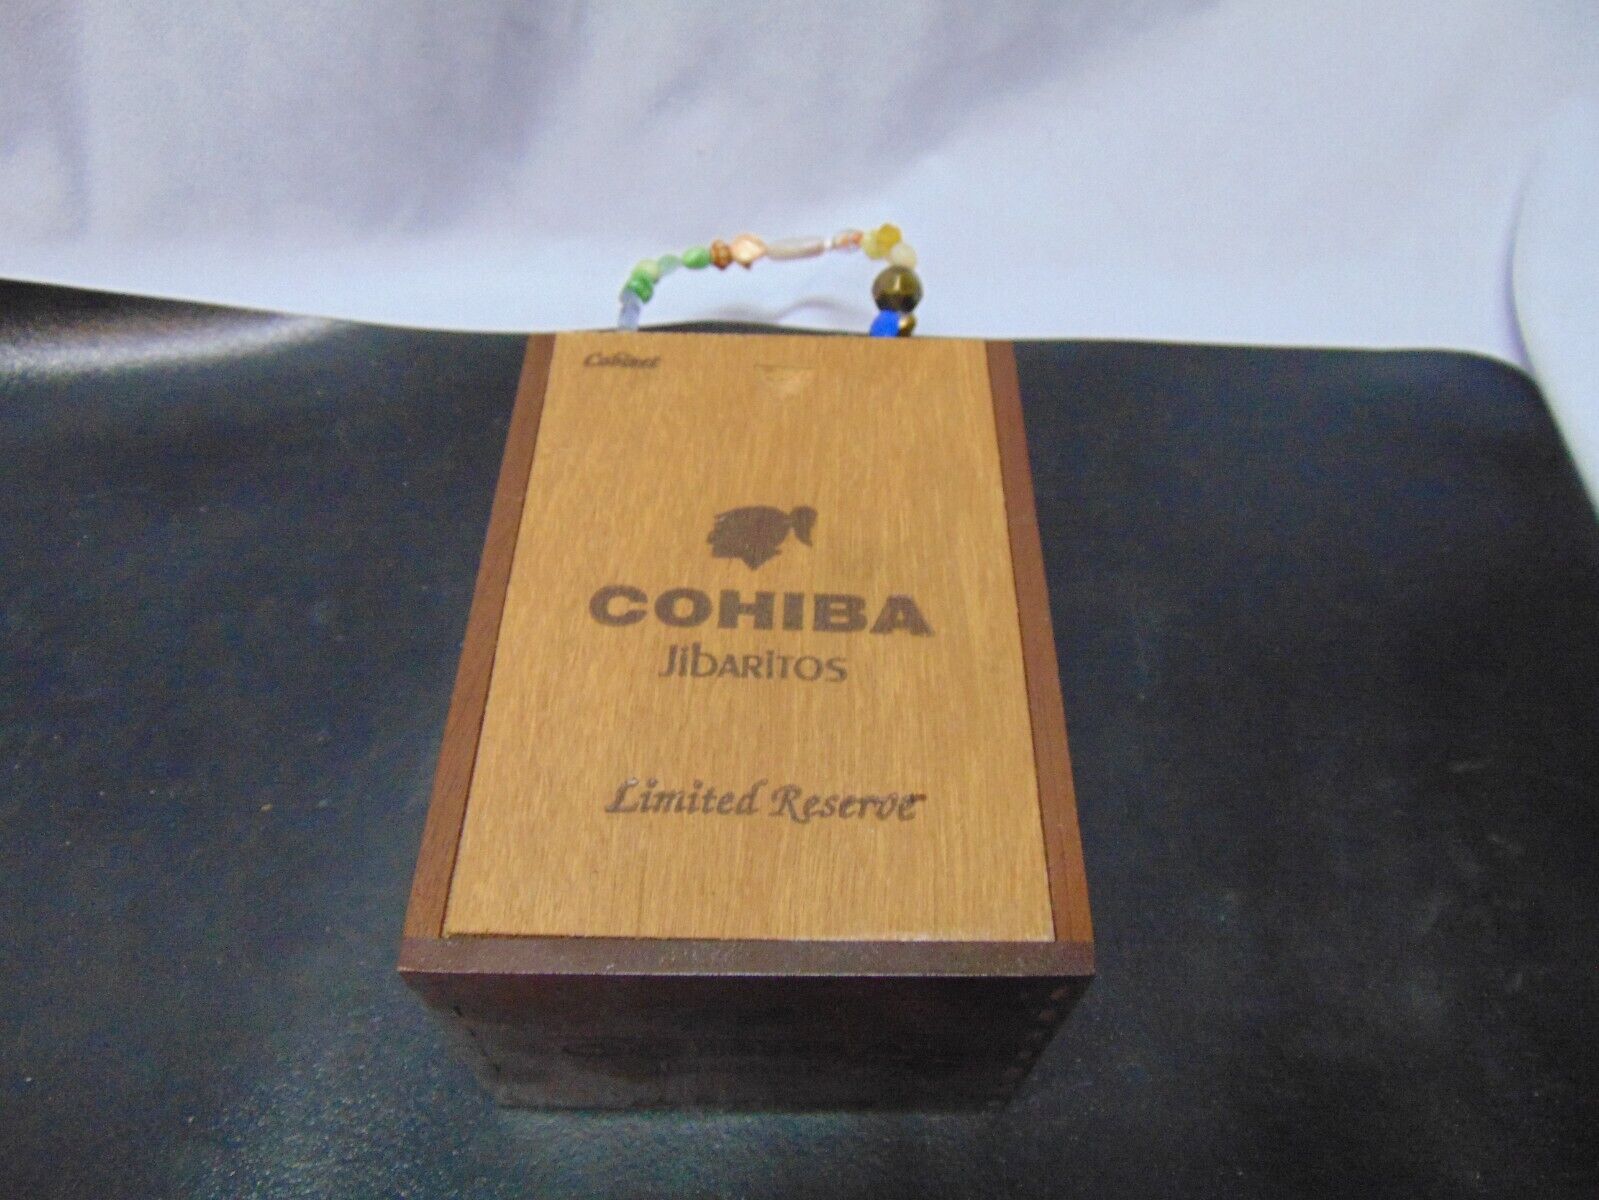 vintage Cohiba Jibaritos Limited Reserve wooden carrying case w/ beaded handle